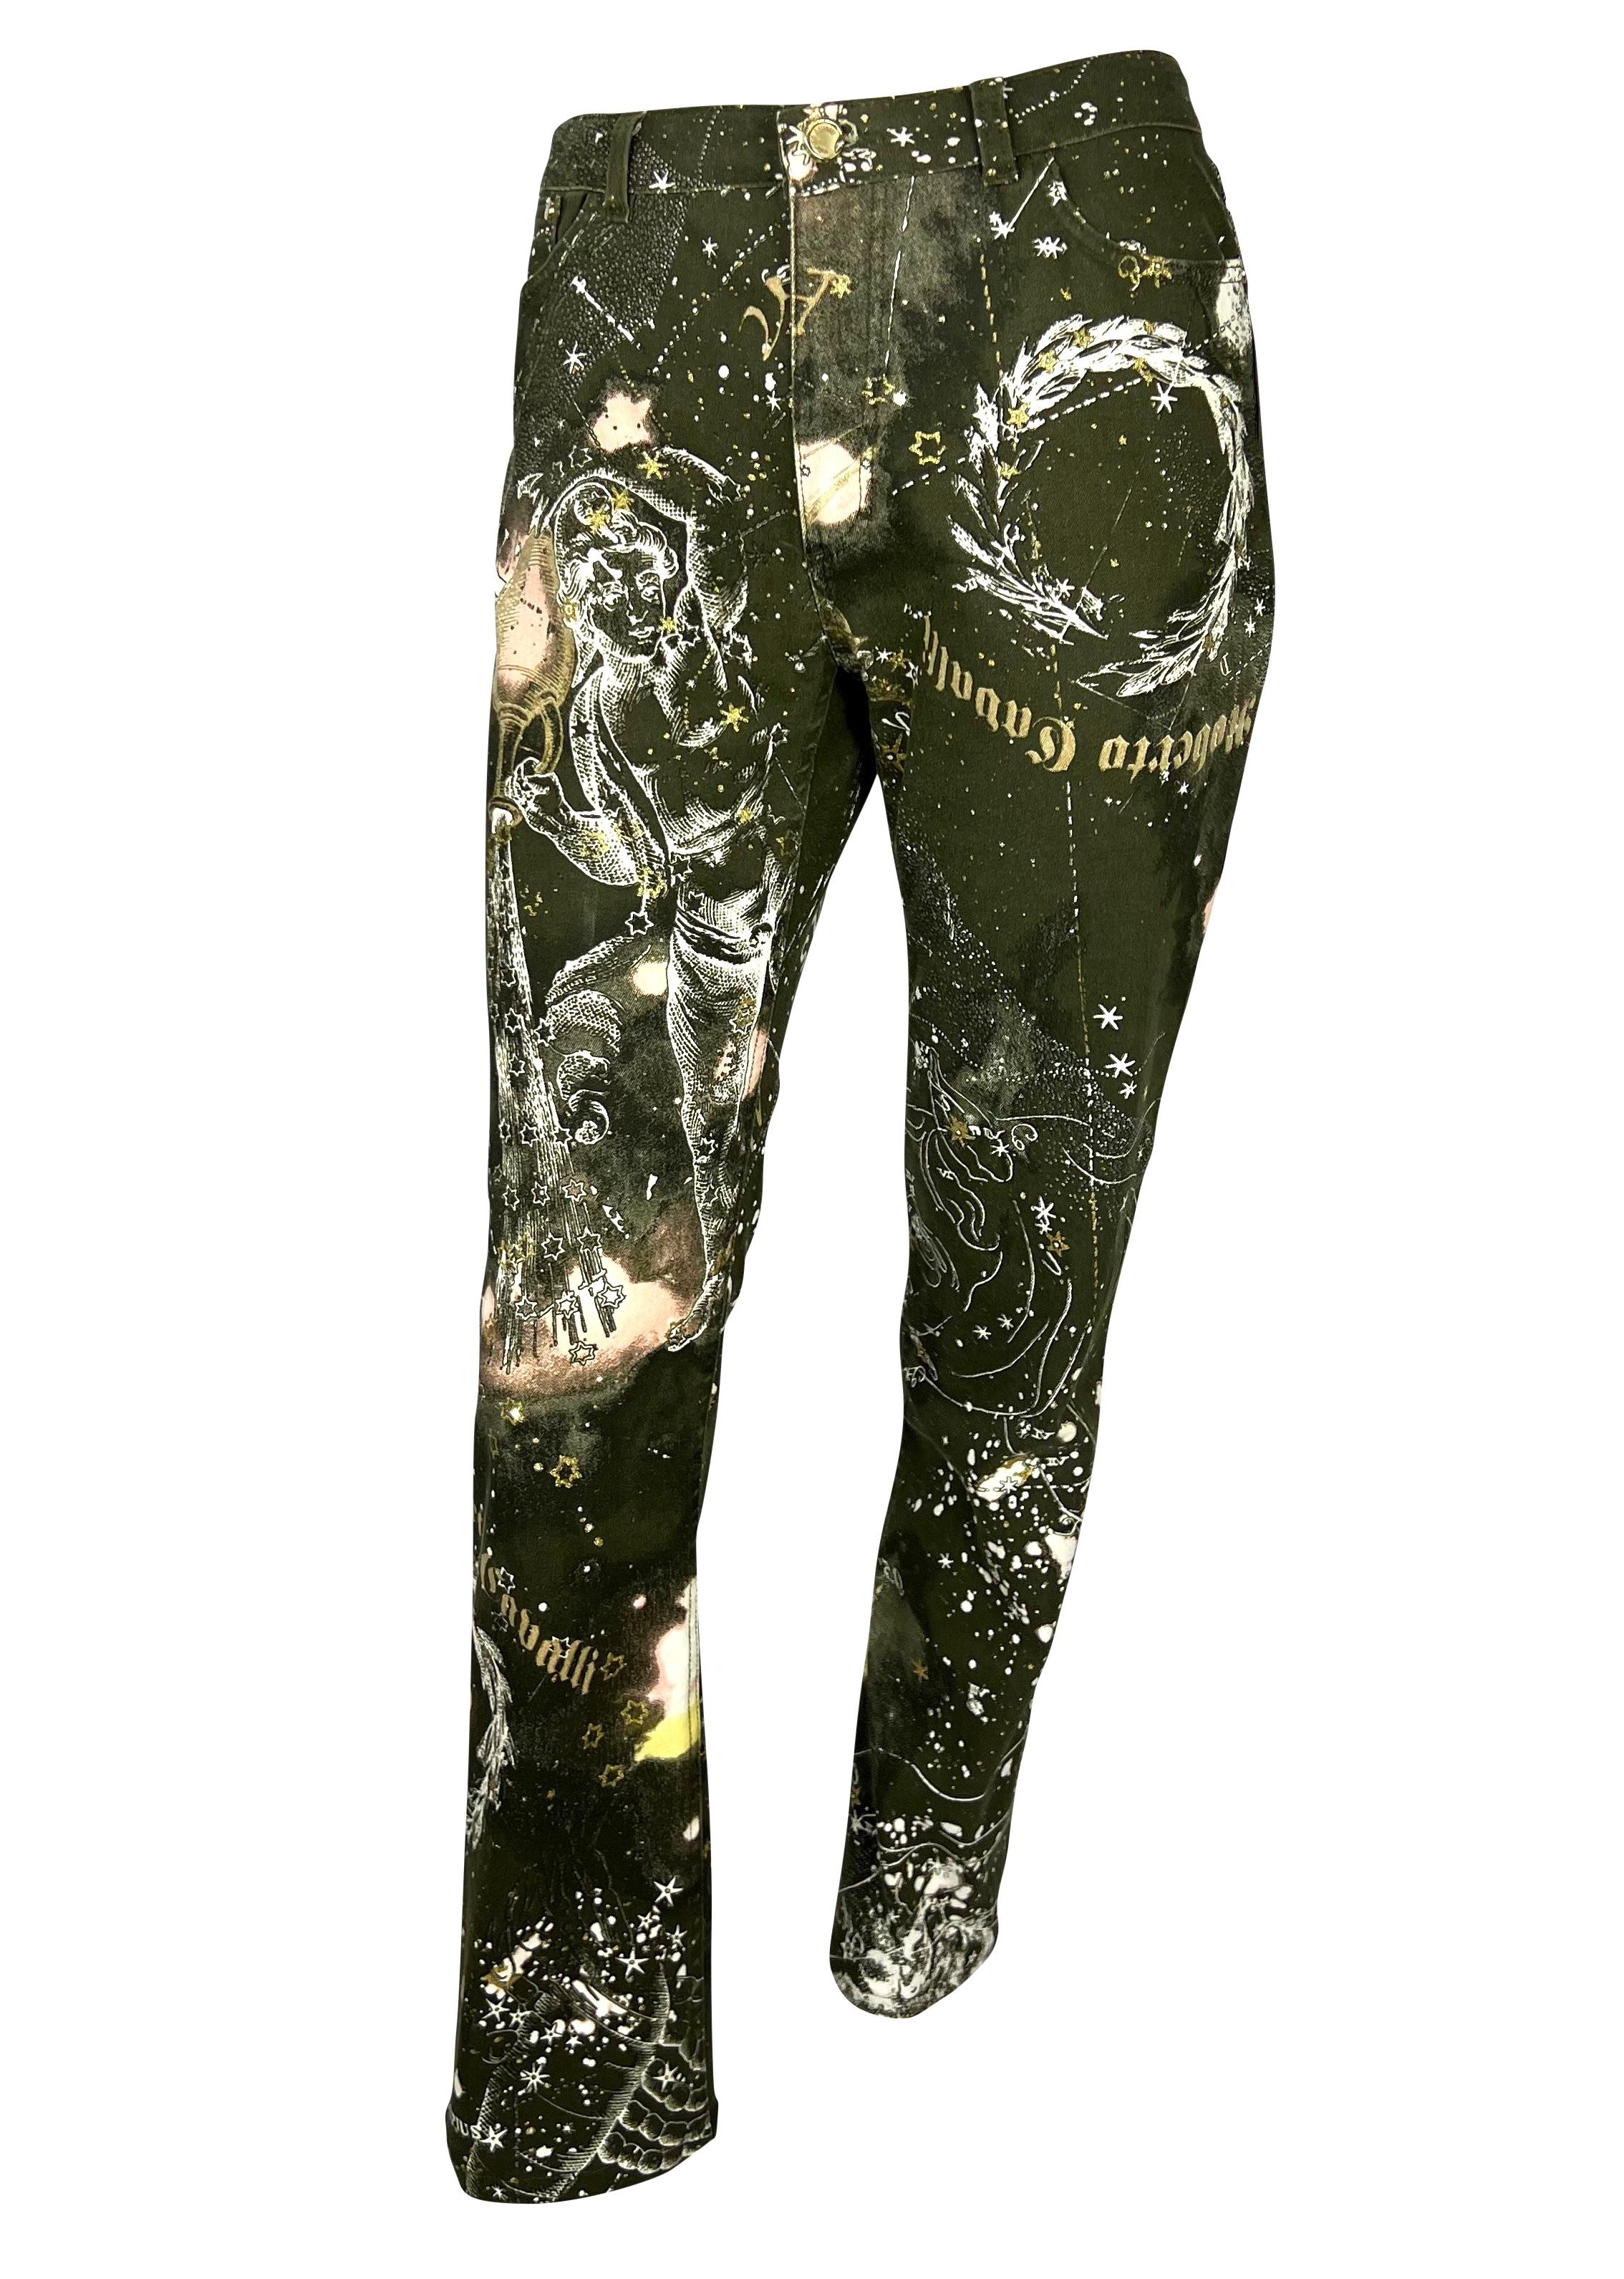 Presenting a pair of stunning astrology print jeans designed by Roberto Cavalli. Since 2003, this sought-after print has featured constellations, horoscope signs, and glittery metallic logos. Check out our storefront for more Y2K Roberto Cavalli in